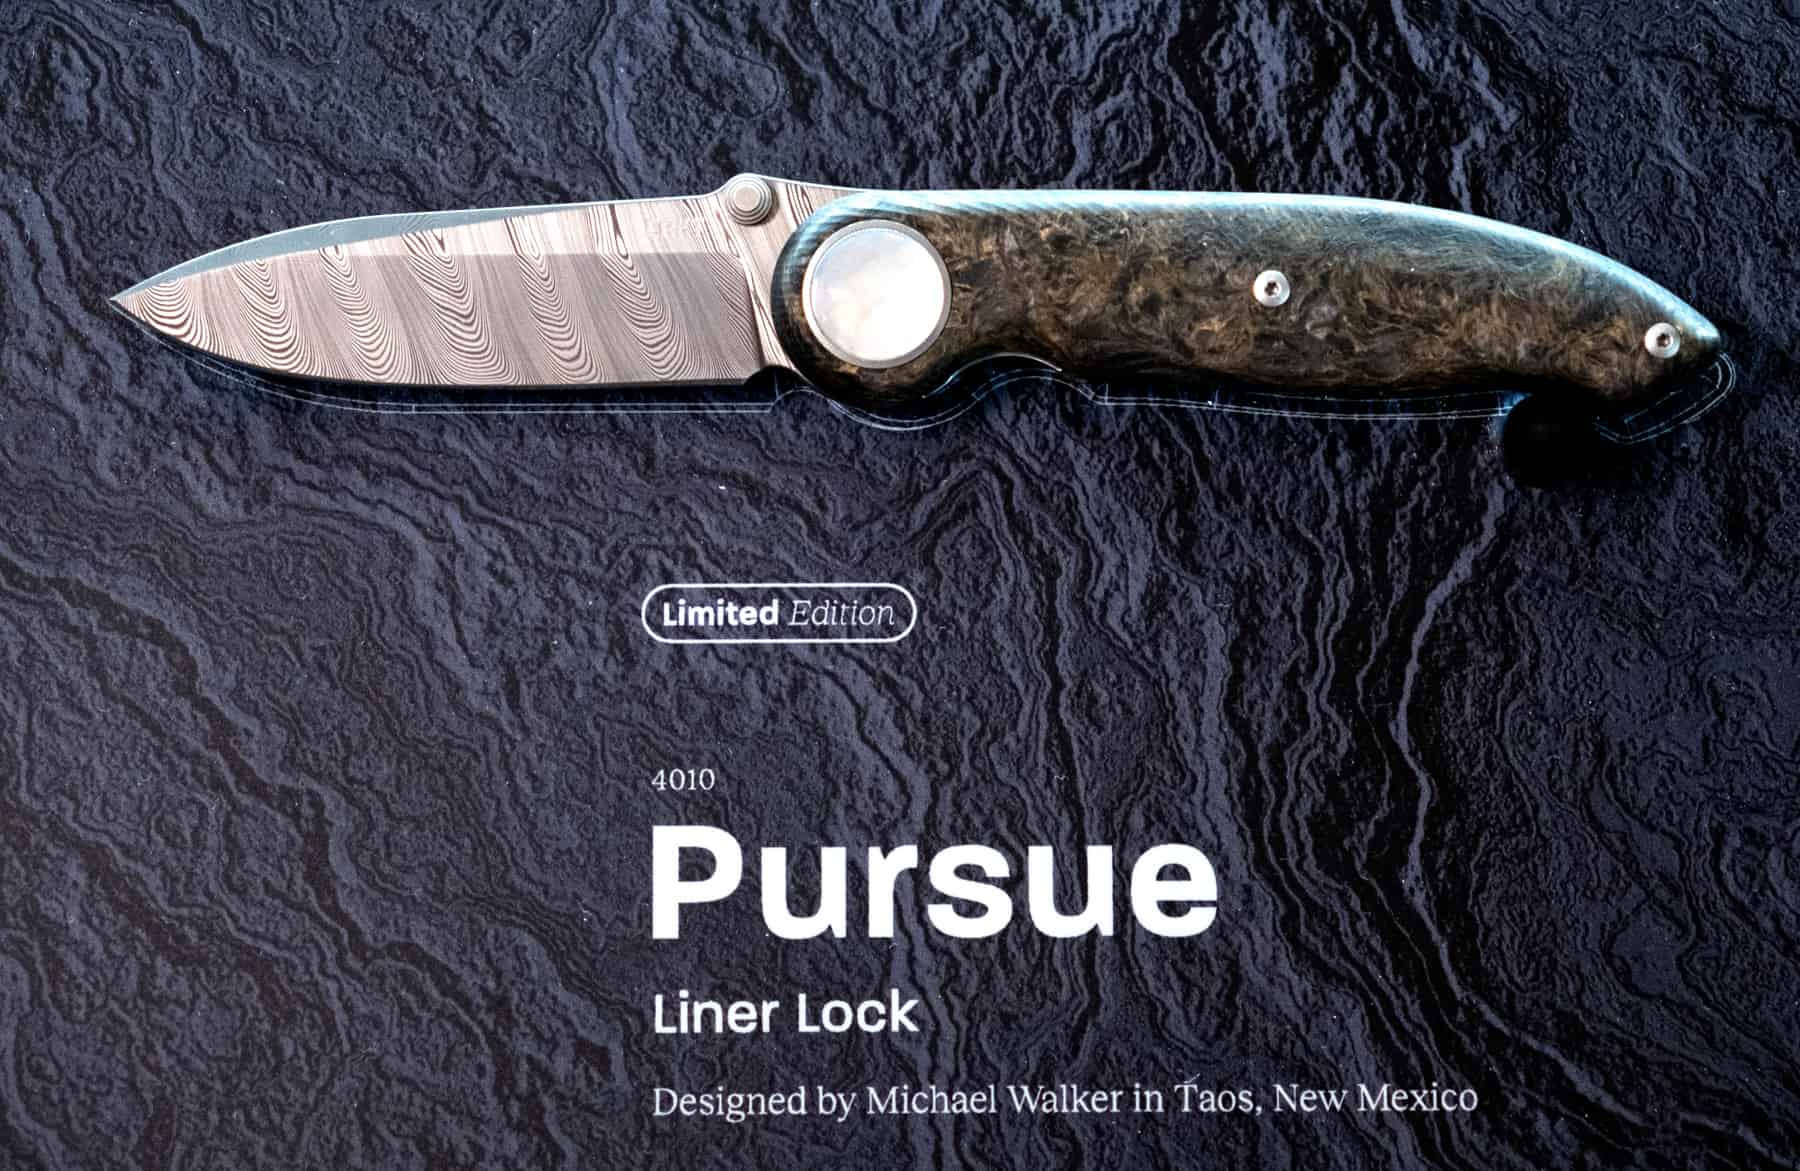 The CRKT Pursue is a limited edition pocket knife designed by Michael Walker for CRKT.